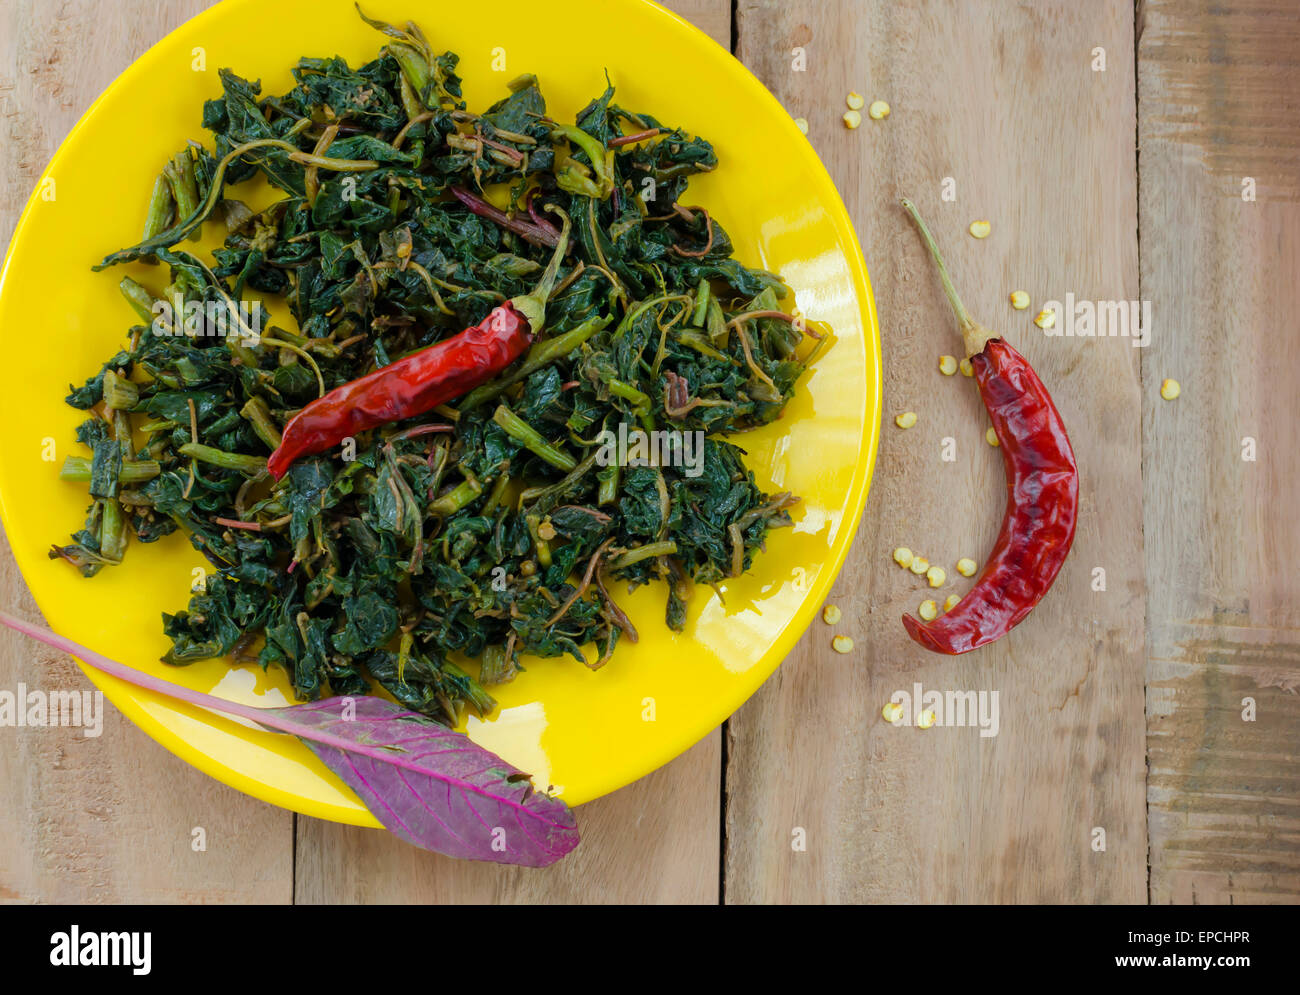 red spinach stir fried with chillies Stock Photo